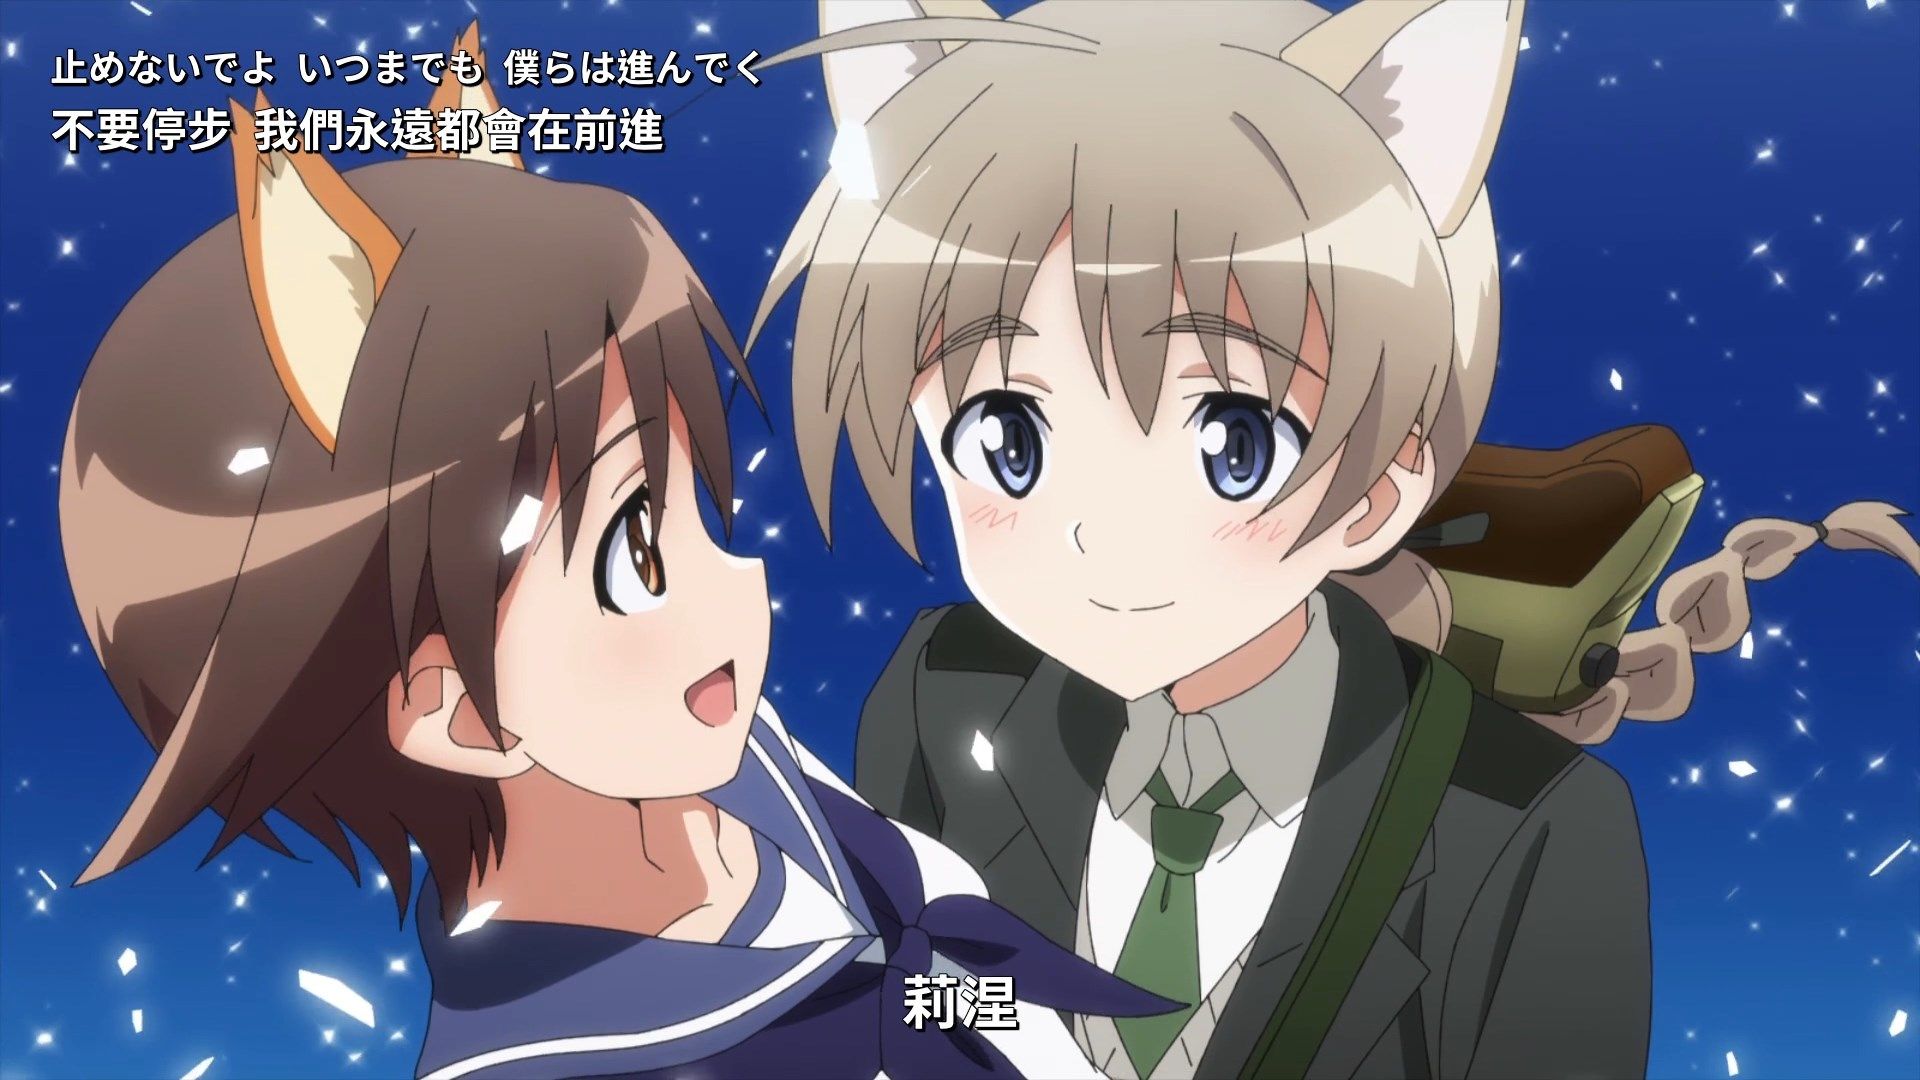 _Lilith_Raws_Strike_Witches_Road_to_Berlin_12_Baha_WEB_DL_1080p_AVC_AAC_CHT_MKV_.mkv_snapshot_21.22